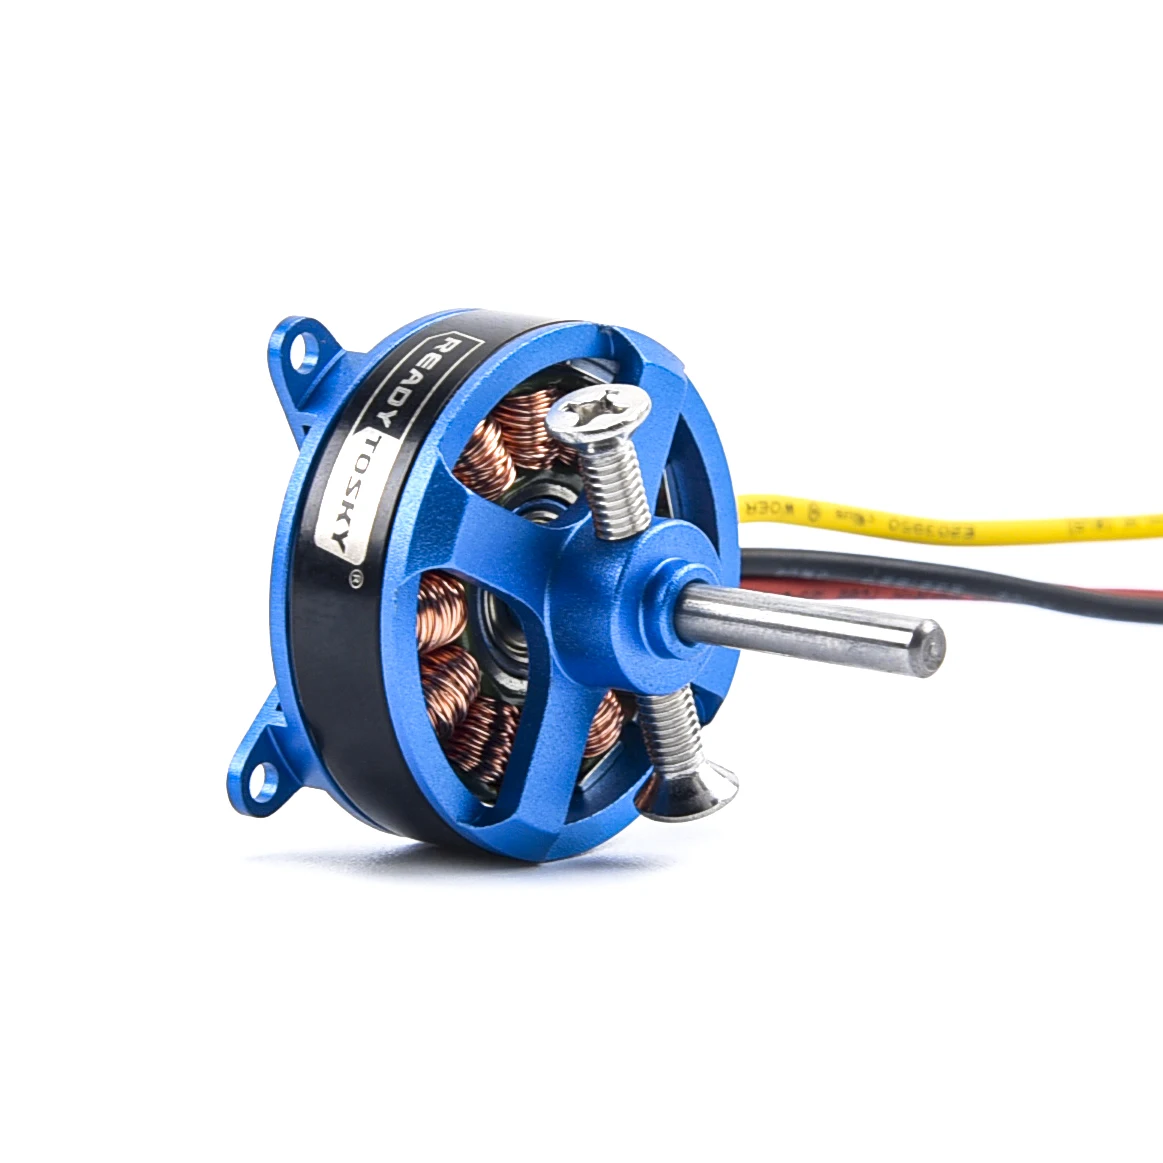 Readytosky LE2204 1800KV Brushless Motor 2-3S for RC Airplane Fixed-Wing Aeroplane KT F3P 